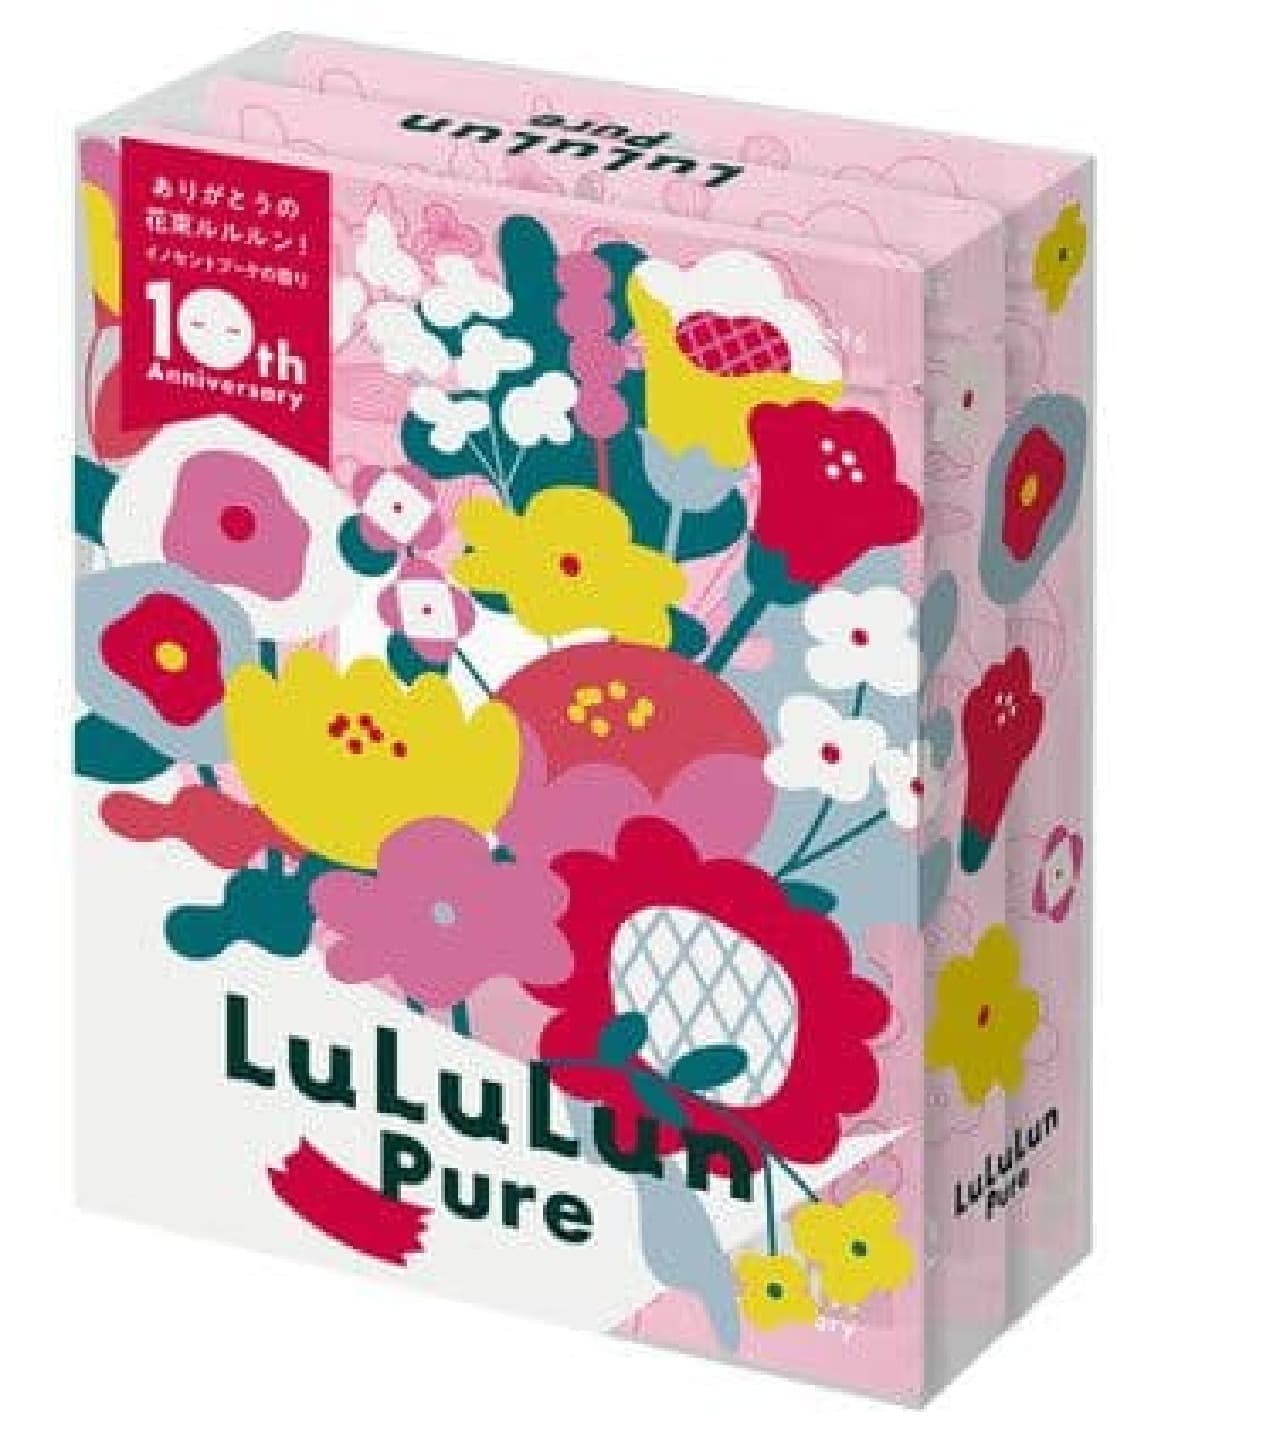 Thank you Lulurun Pure (scent of innocent bouquet)